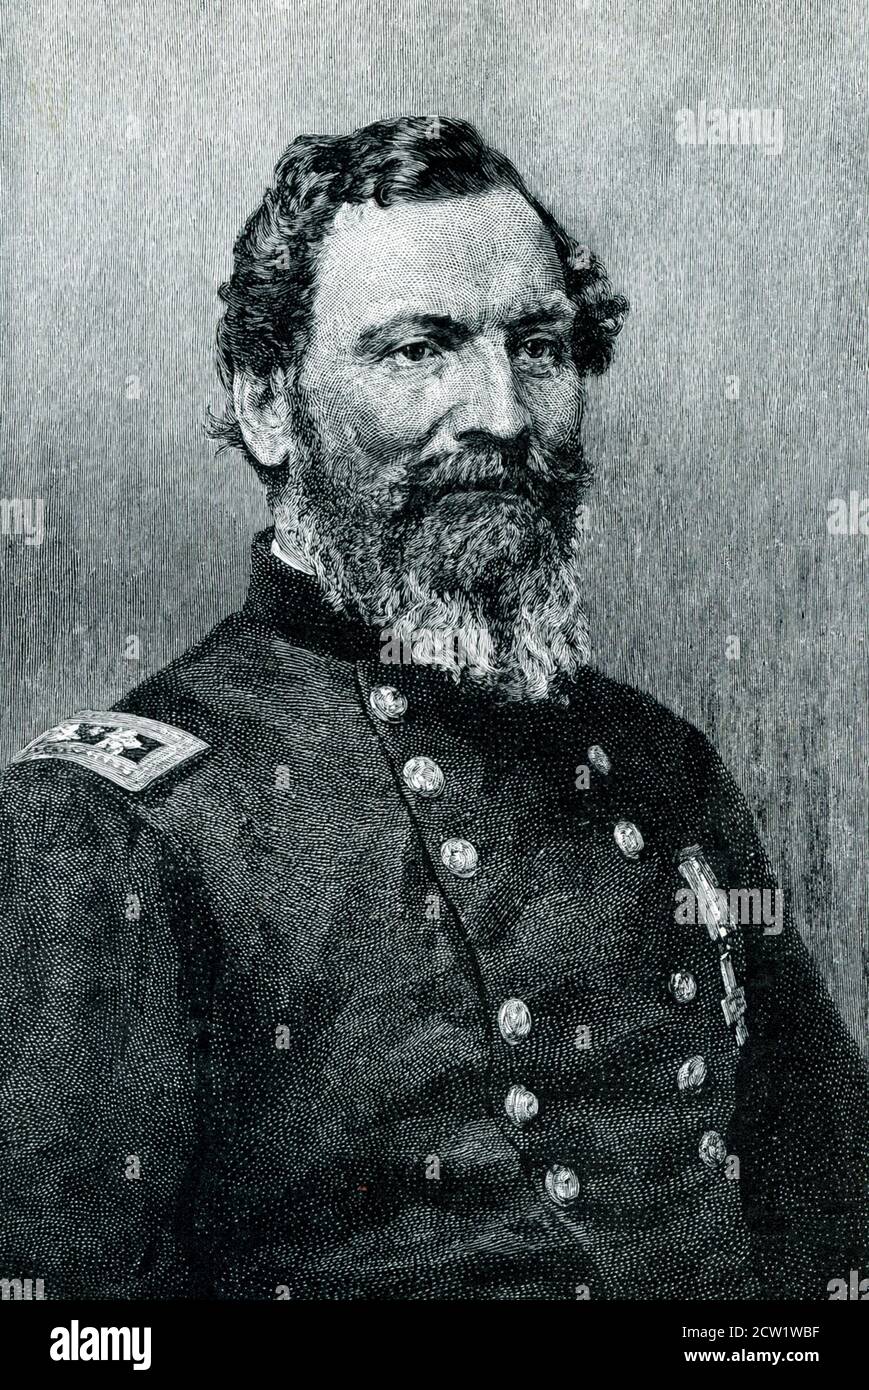 John Sedgwick (September 13, 1813 – May 9, 1864) was a military officer and Union Army general during the American Civil War. He was one of the most experienced and competent officers in the Army of the Potomac. HJ was killed at Battle of Spotsylvania court House in 1864. Stock Photo